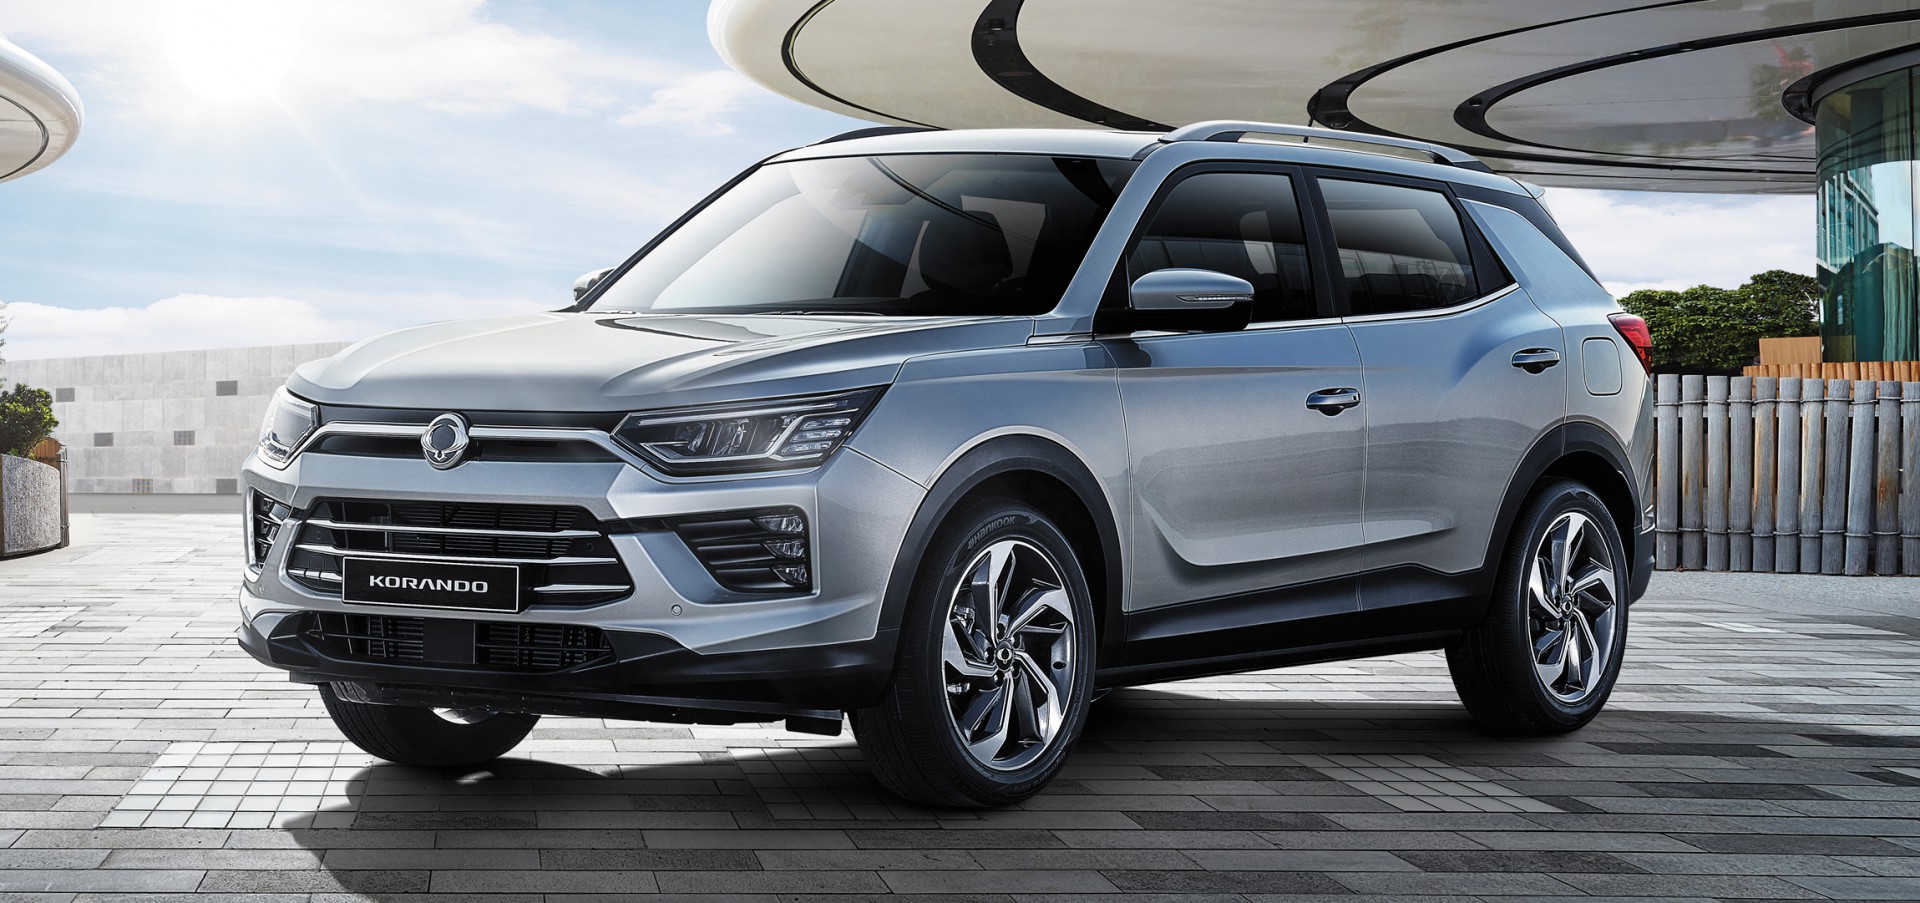 SsangYong new Tivoli - Escape from the ordinary